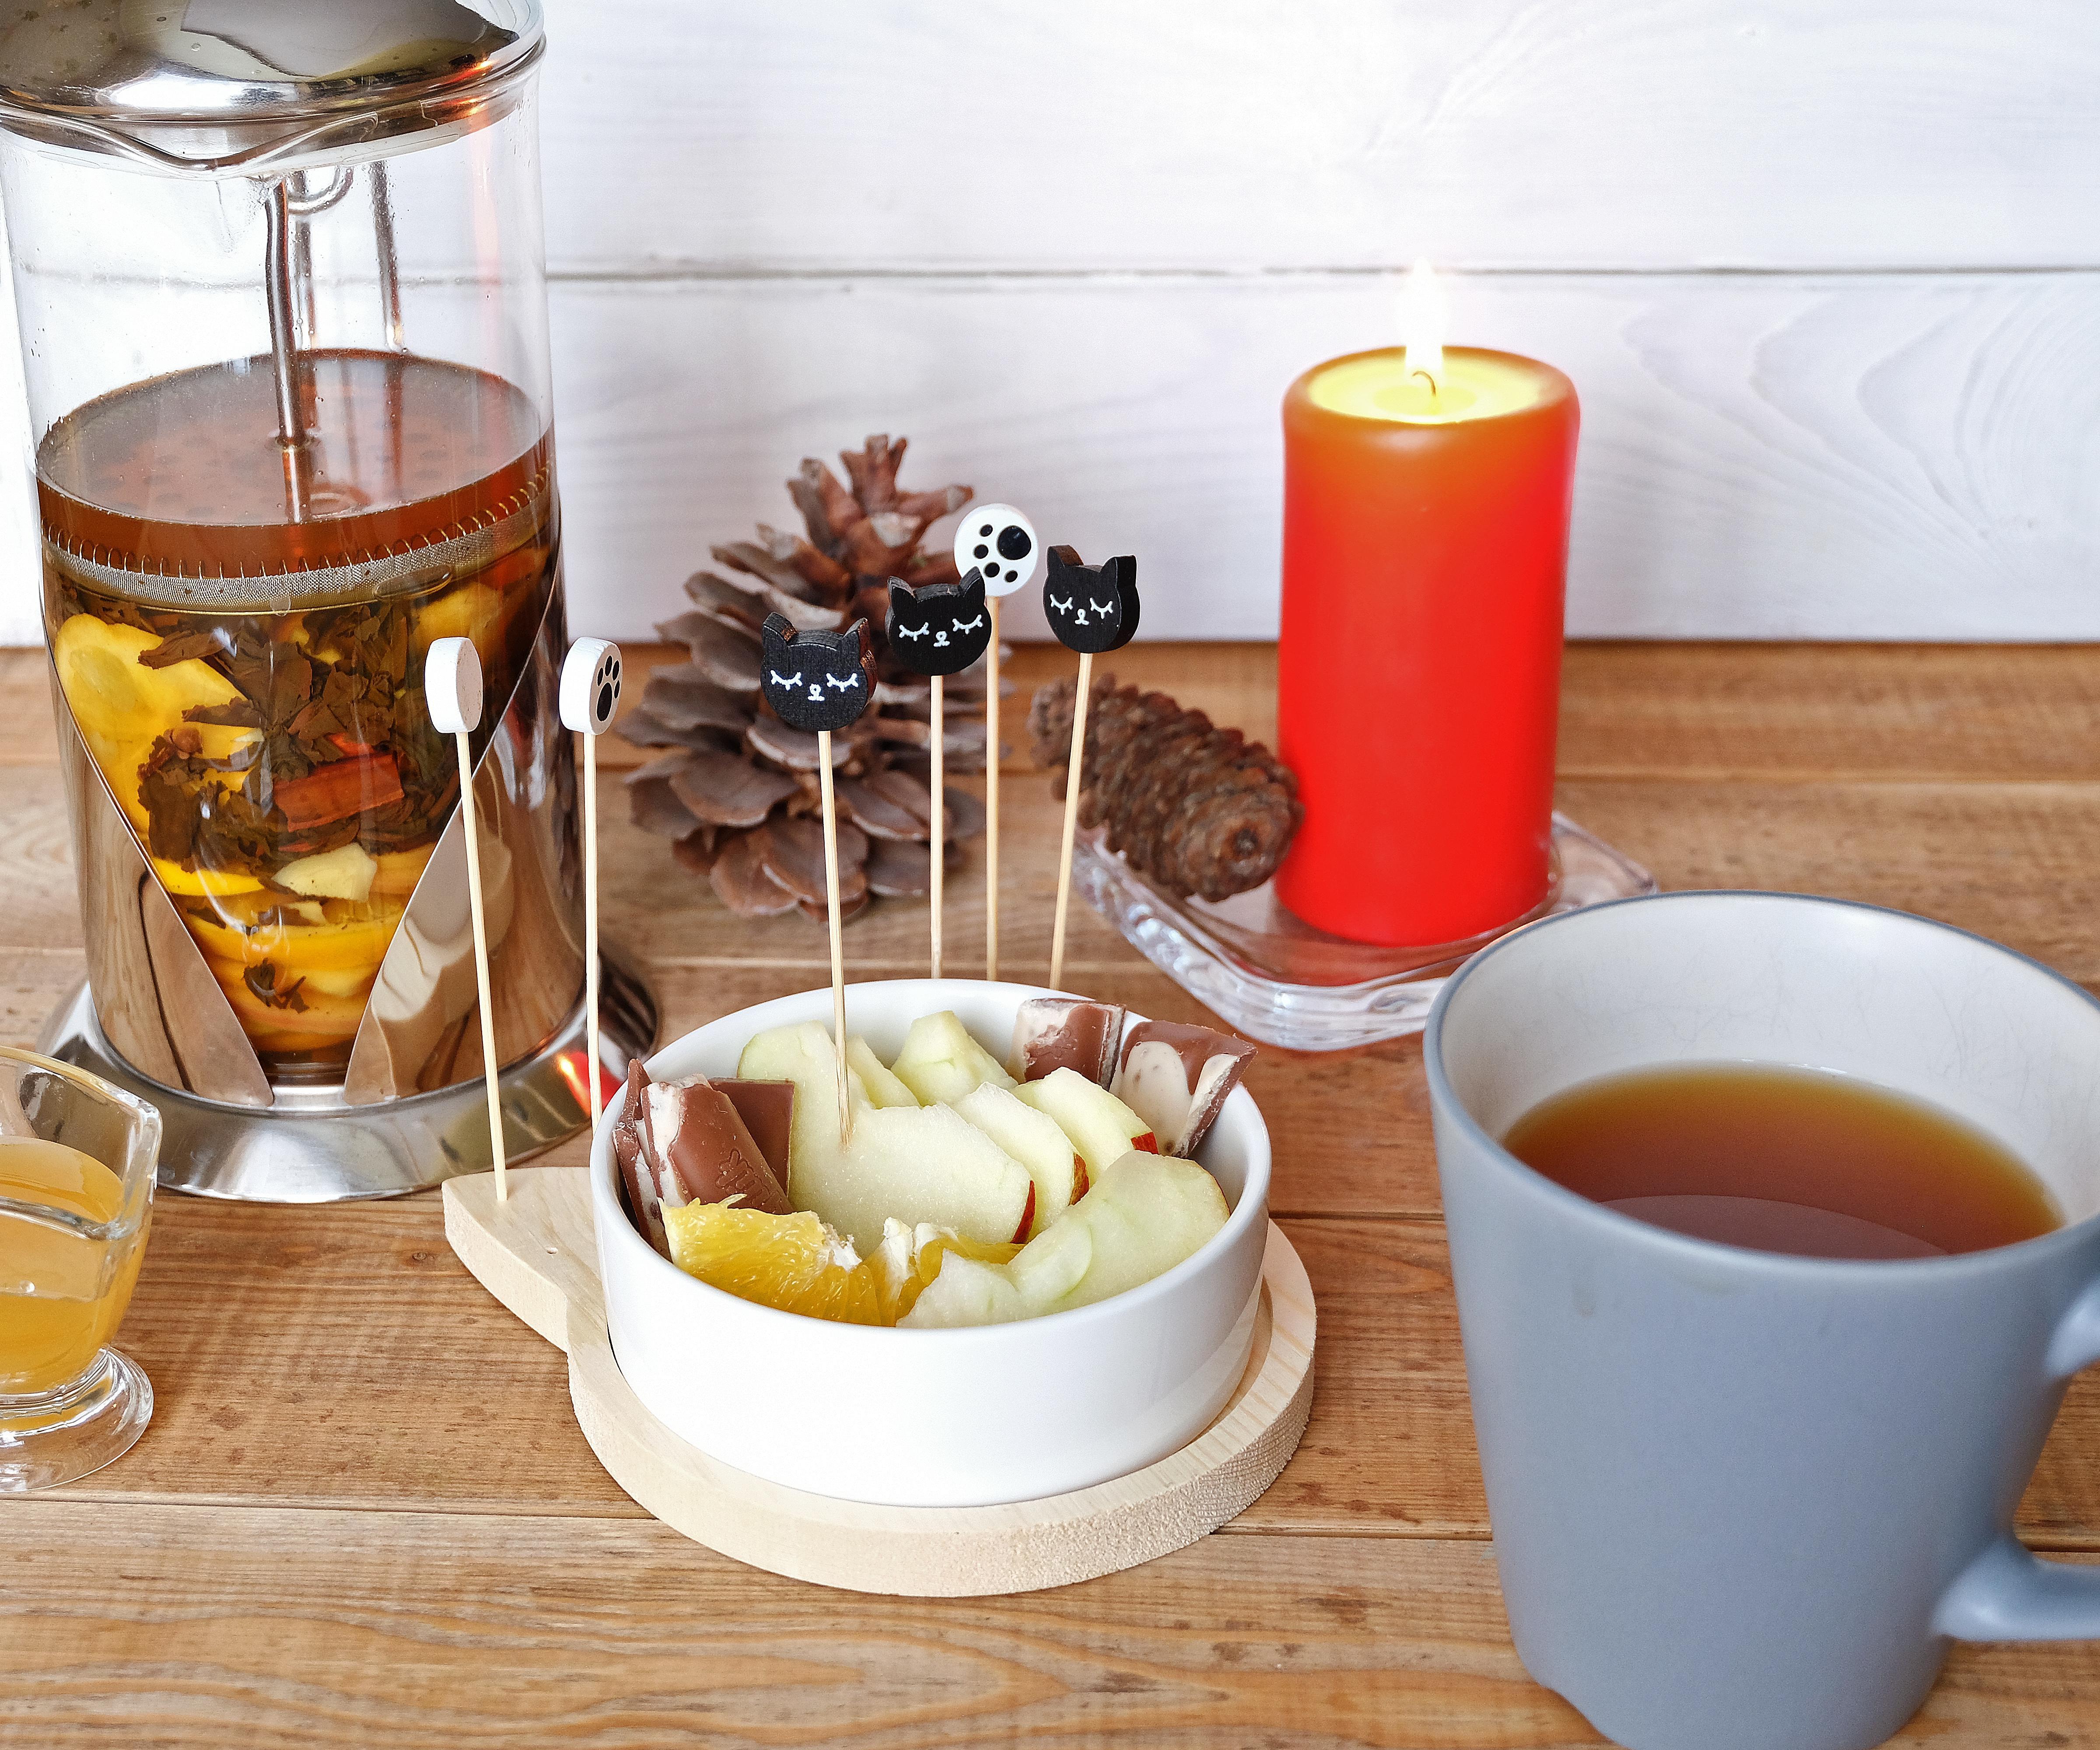 Warming Tea With Spices and Fruits 